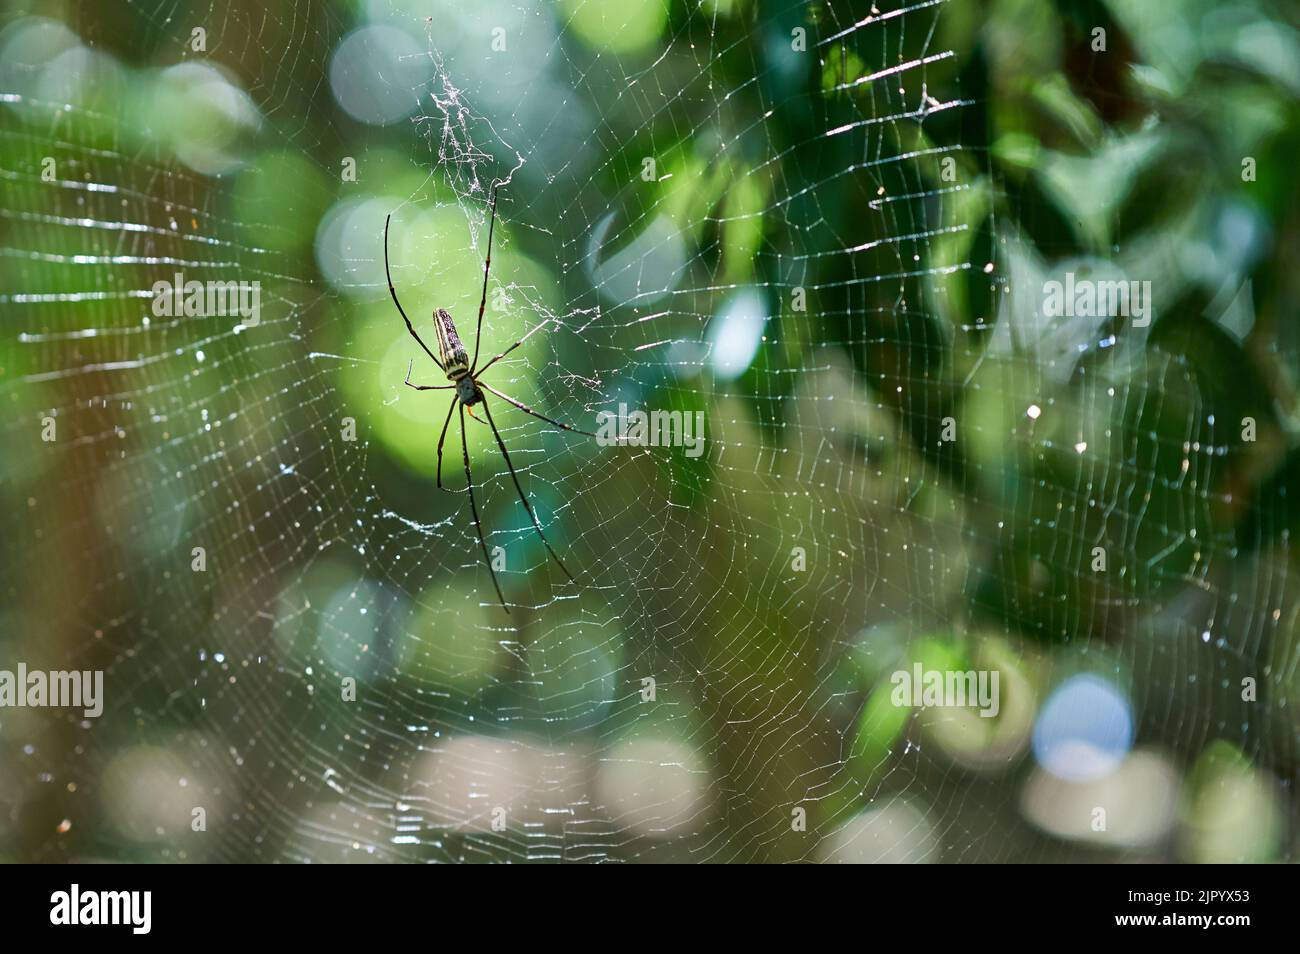 A large spider in a web in a green forest, with evening sunlight. Stock Photo